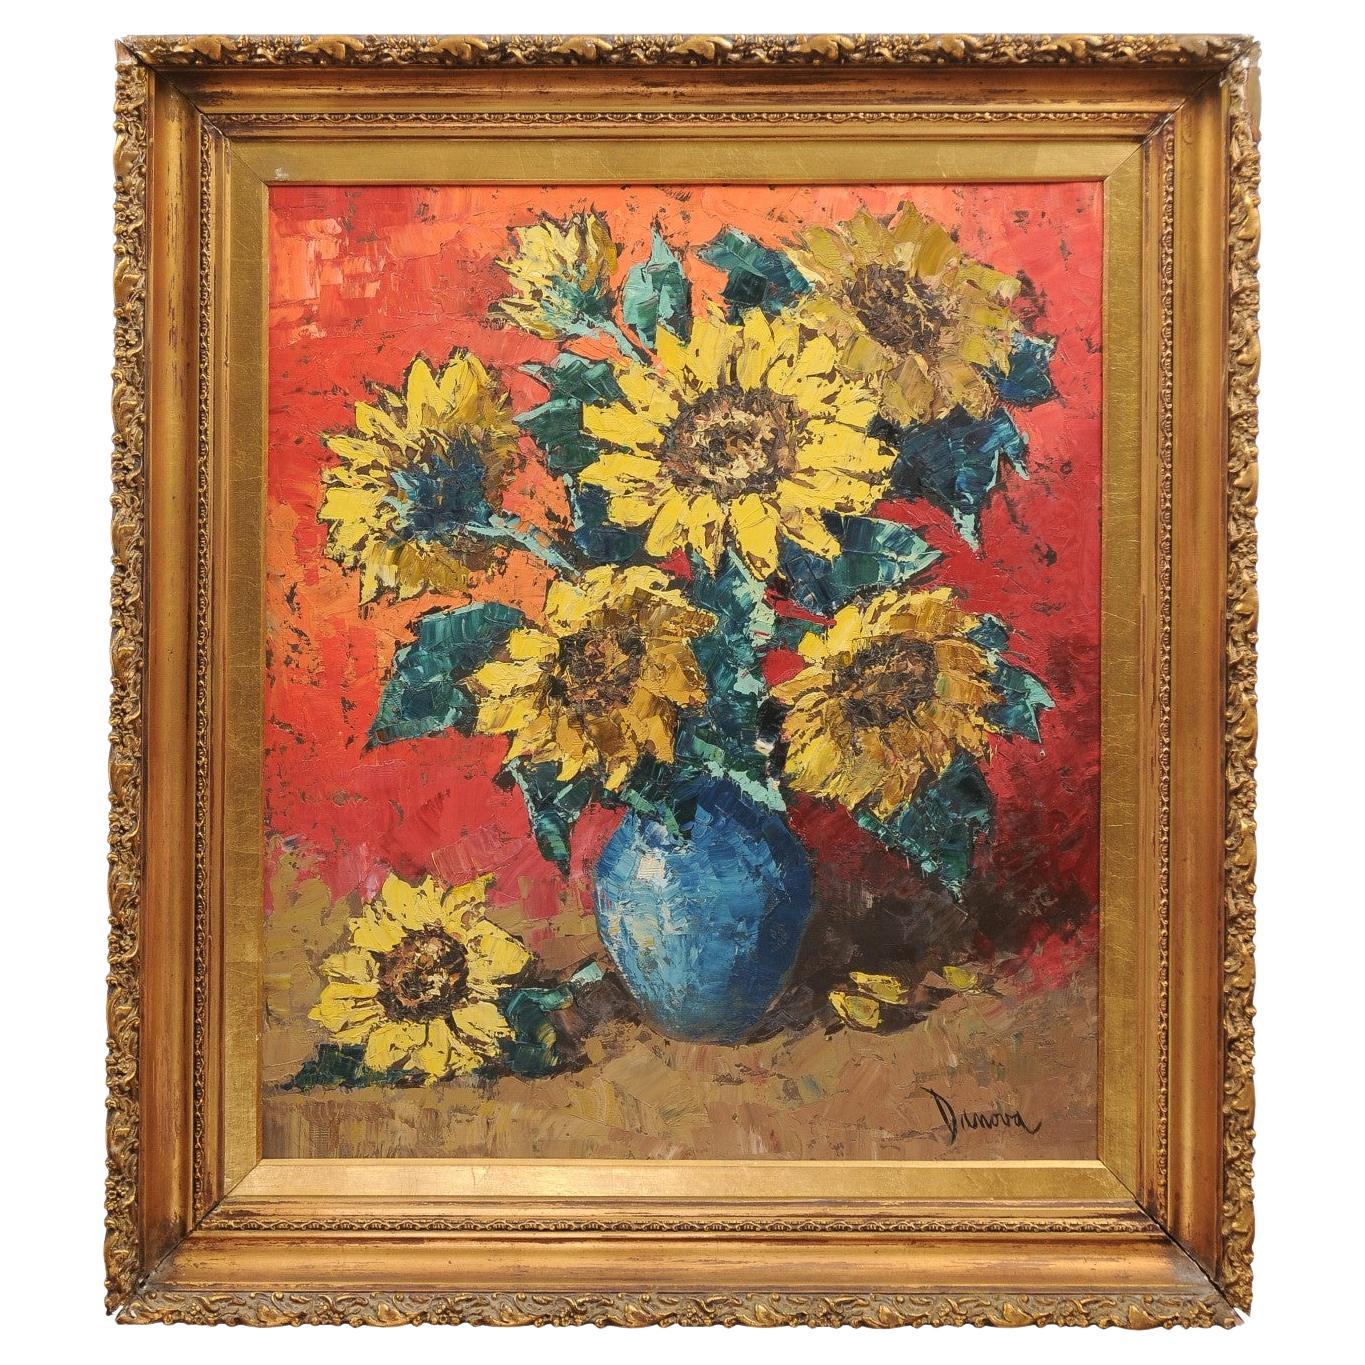  Giltwood Framed Oil on Board Painting of Sunflowers in Vase, Signed, 20th c. For Sale